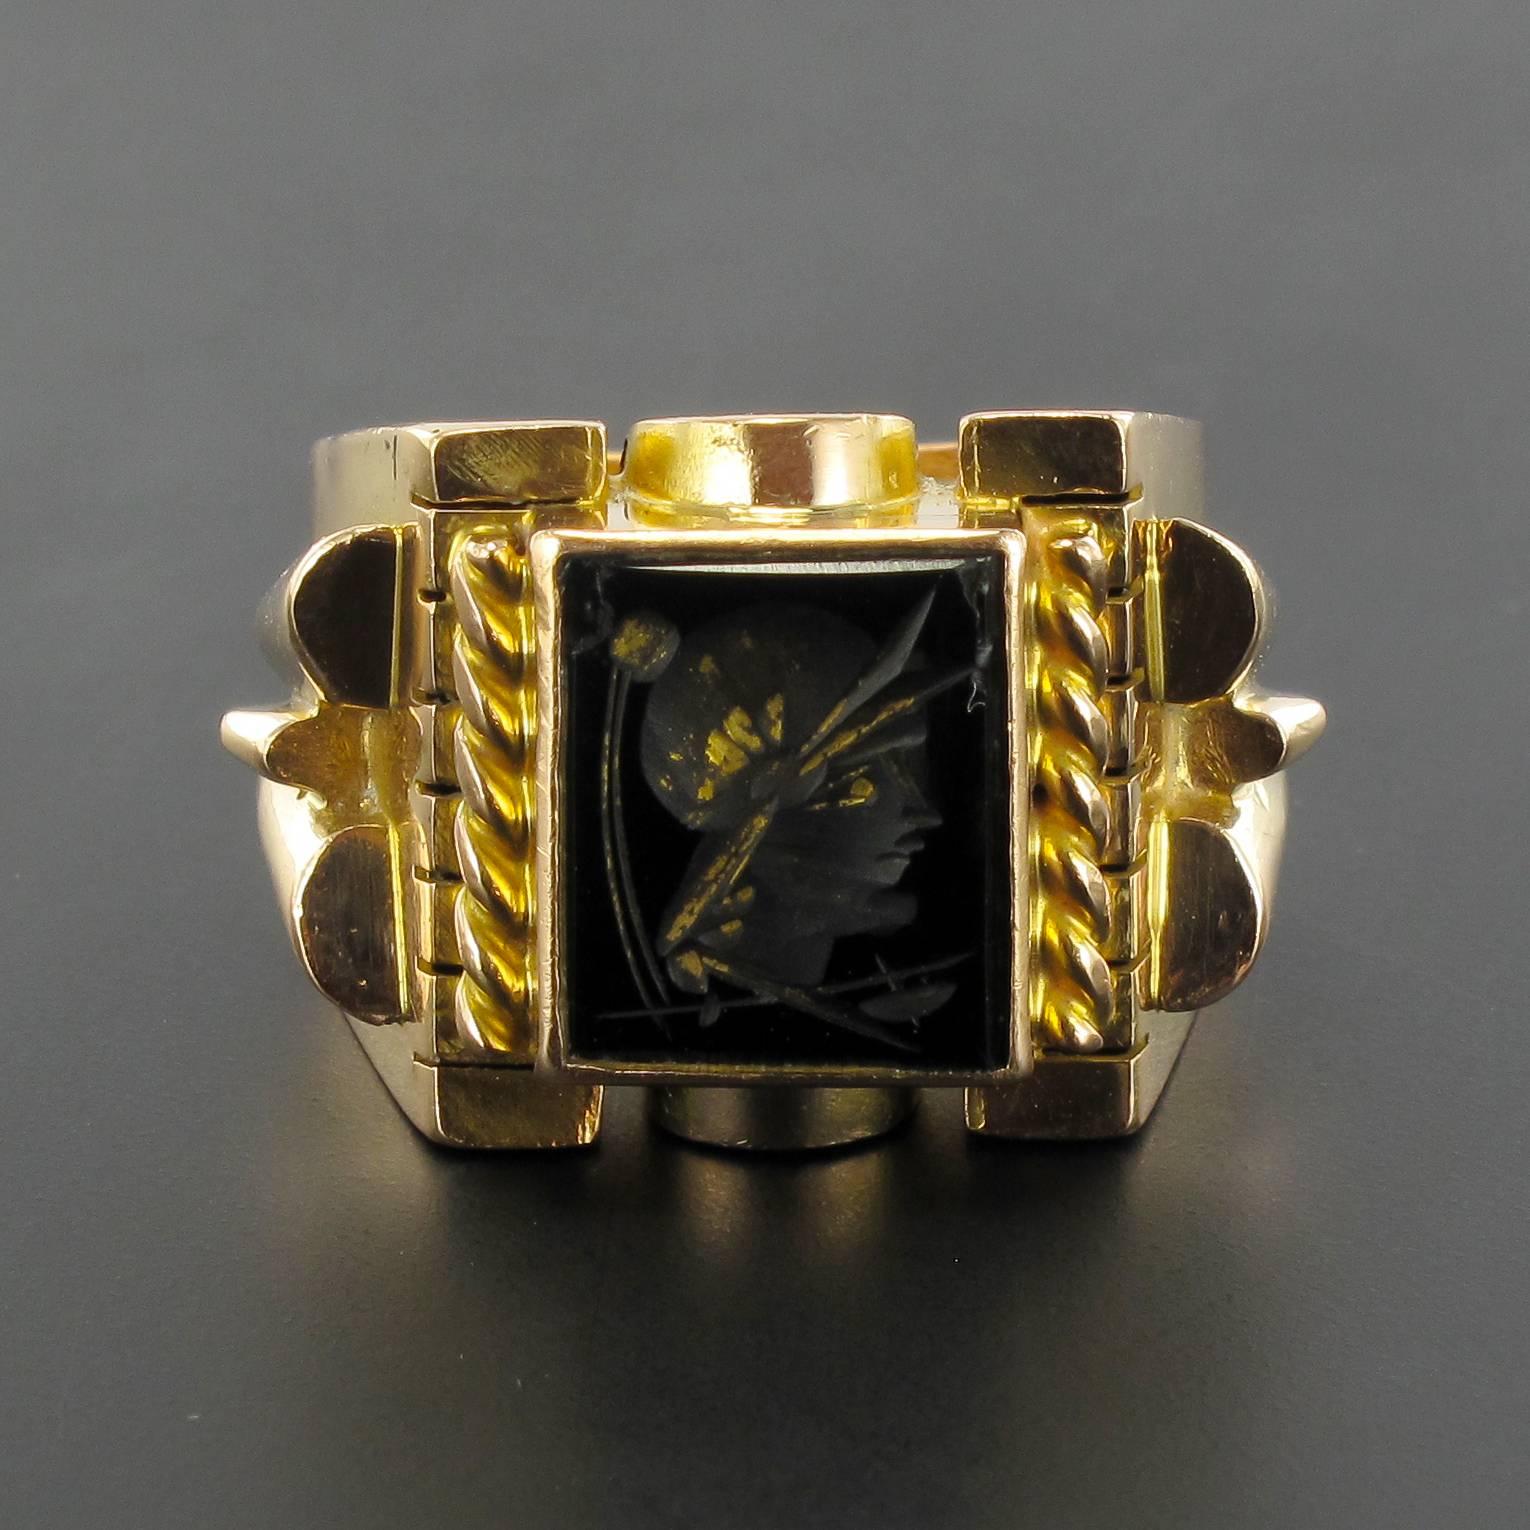 18 carat yellow gold ring, eagle head hallmark. 

This superb signet ring is bezel set with a square intaglio in onyx representing a helmeted warrior partially decorated with gold leaf. On each side are gold braids, the solid mount is set at each